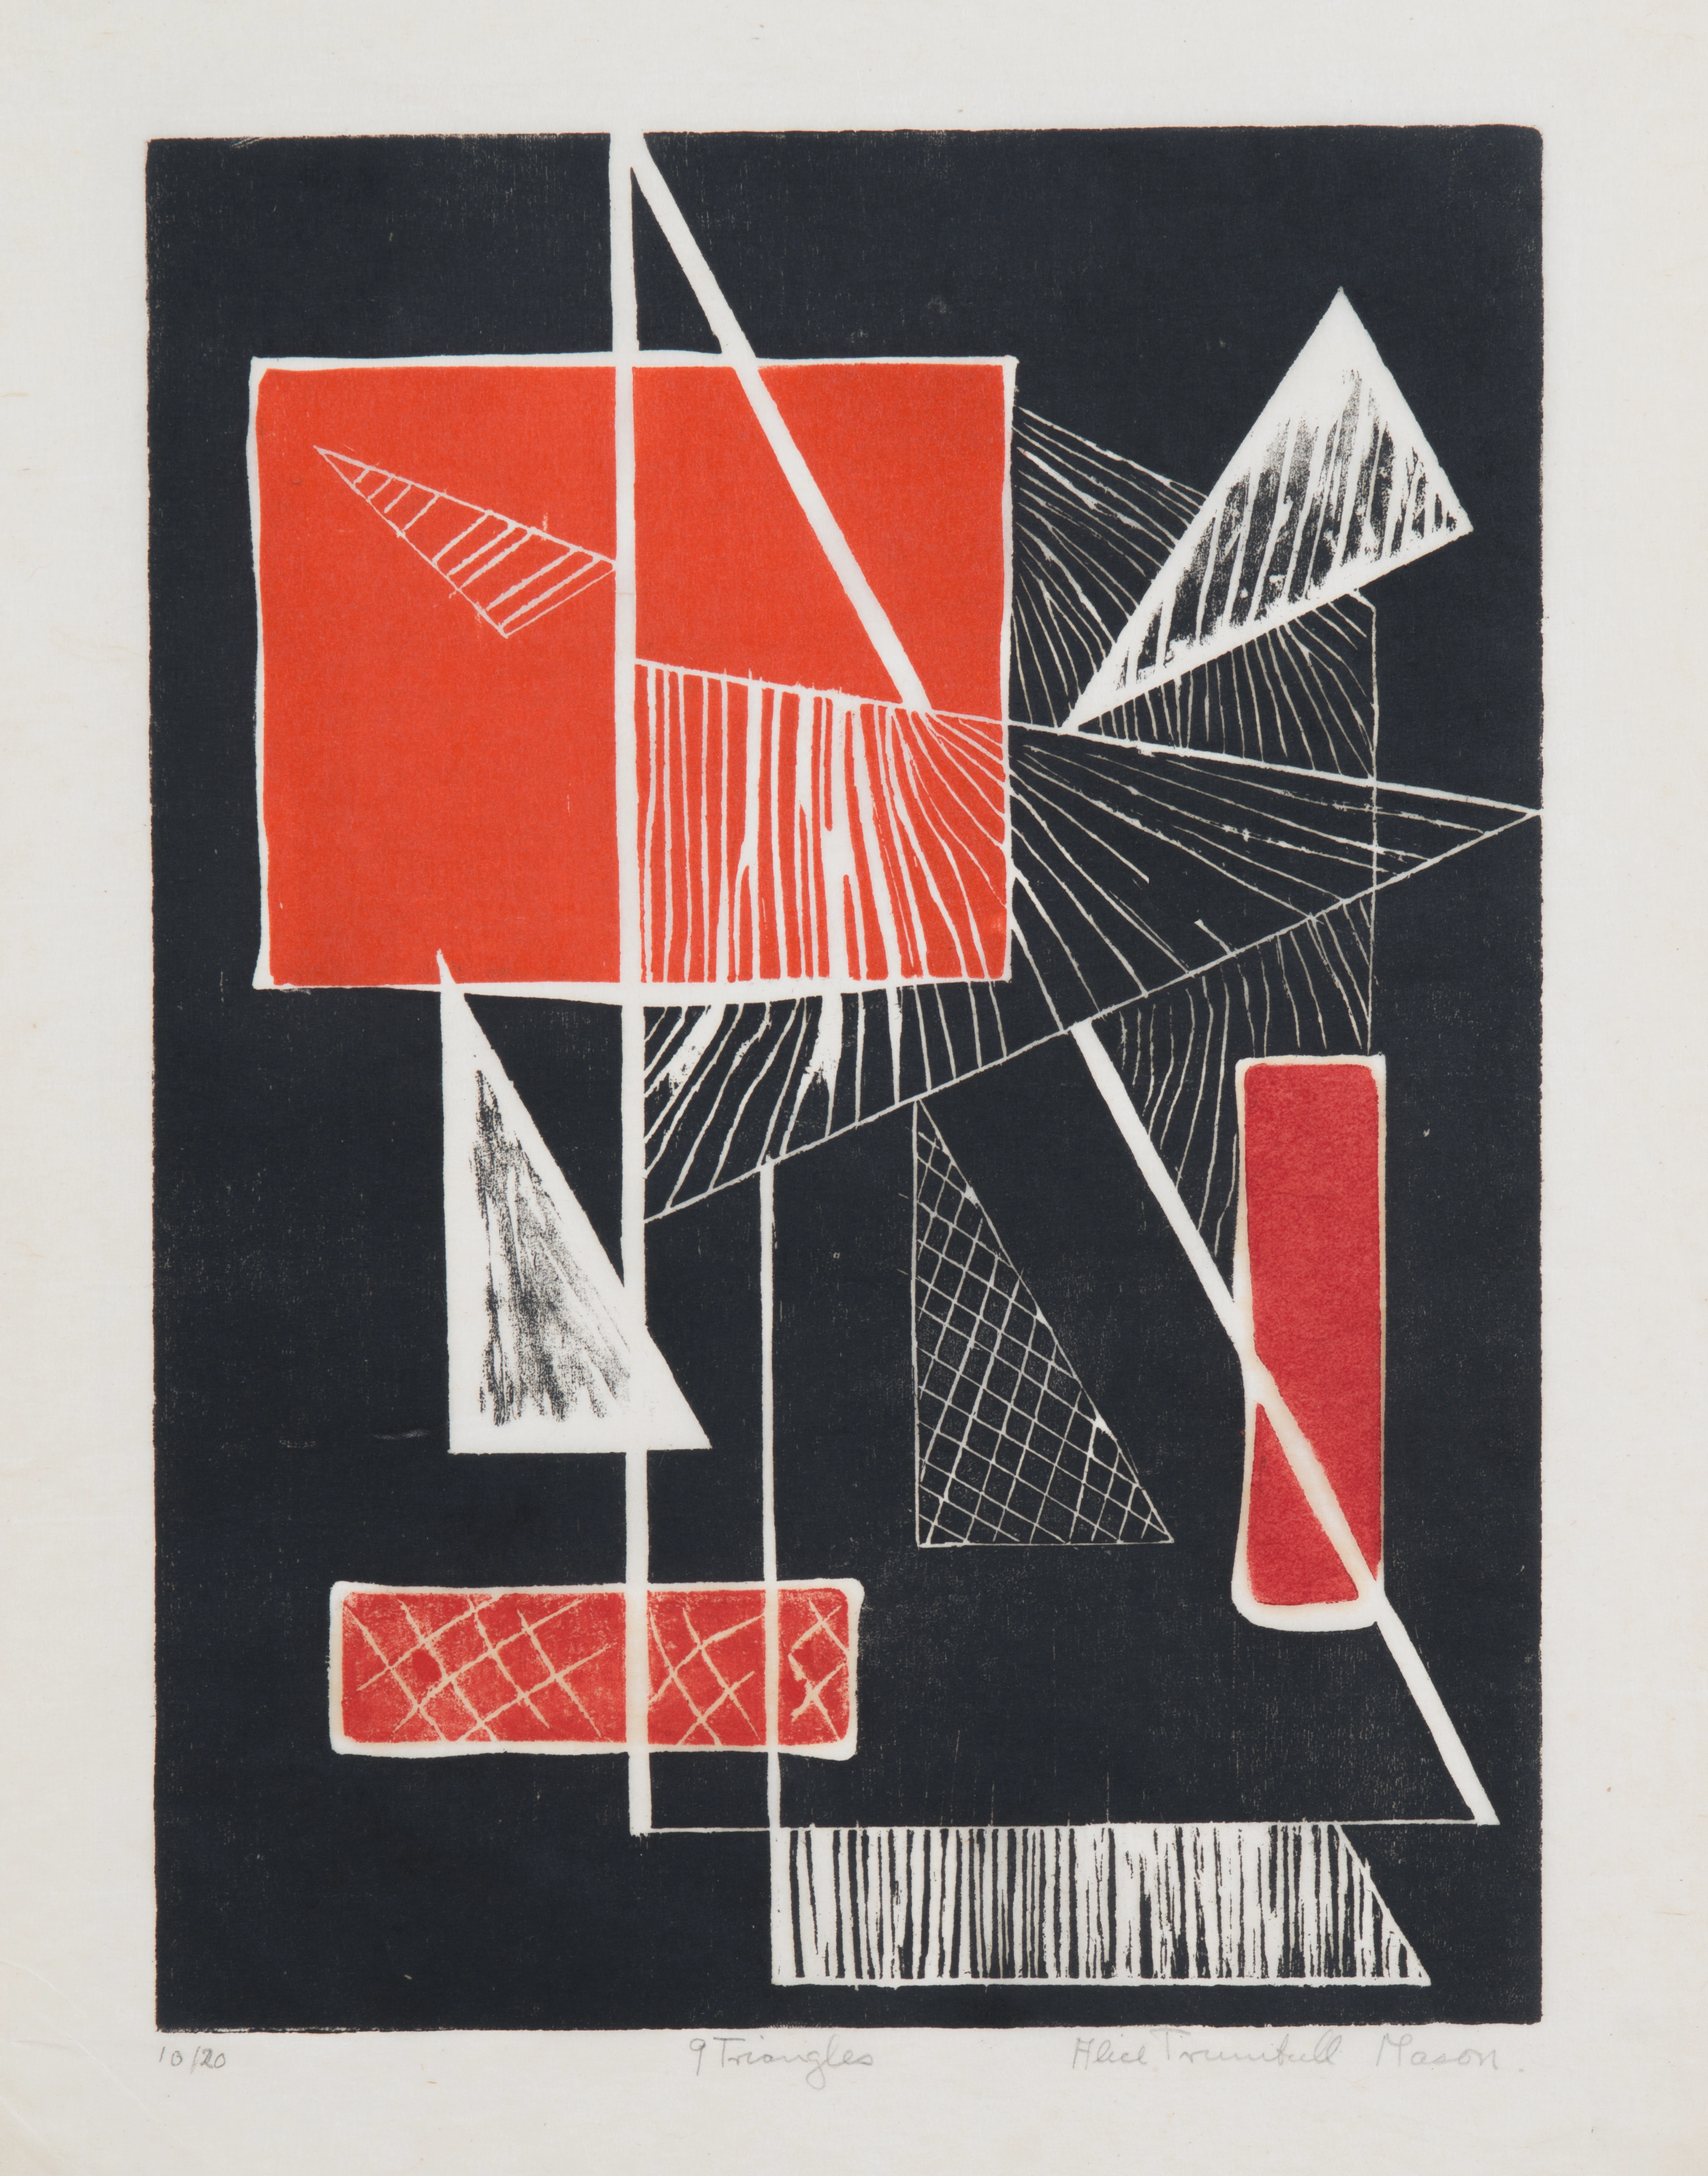 Abstract print on paper of white lines and white triangles, some more filled in than others, overlapping with one large red rectangle and two slender red rectangles.